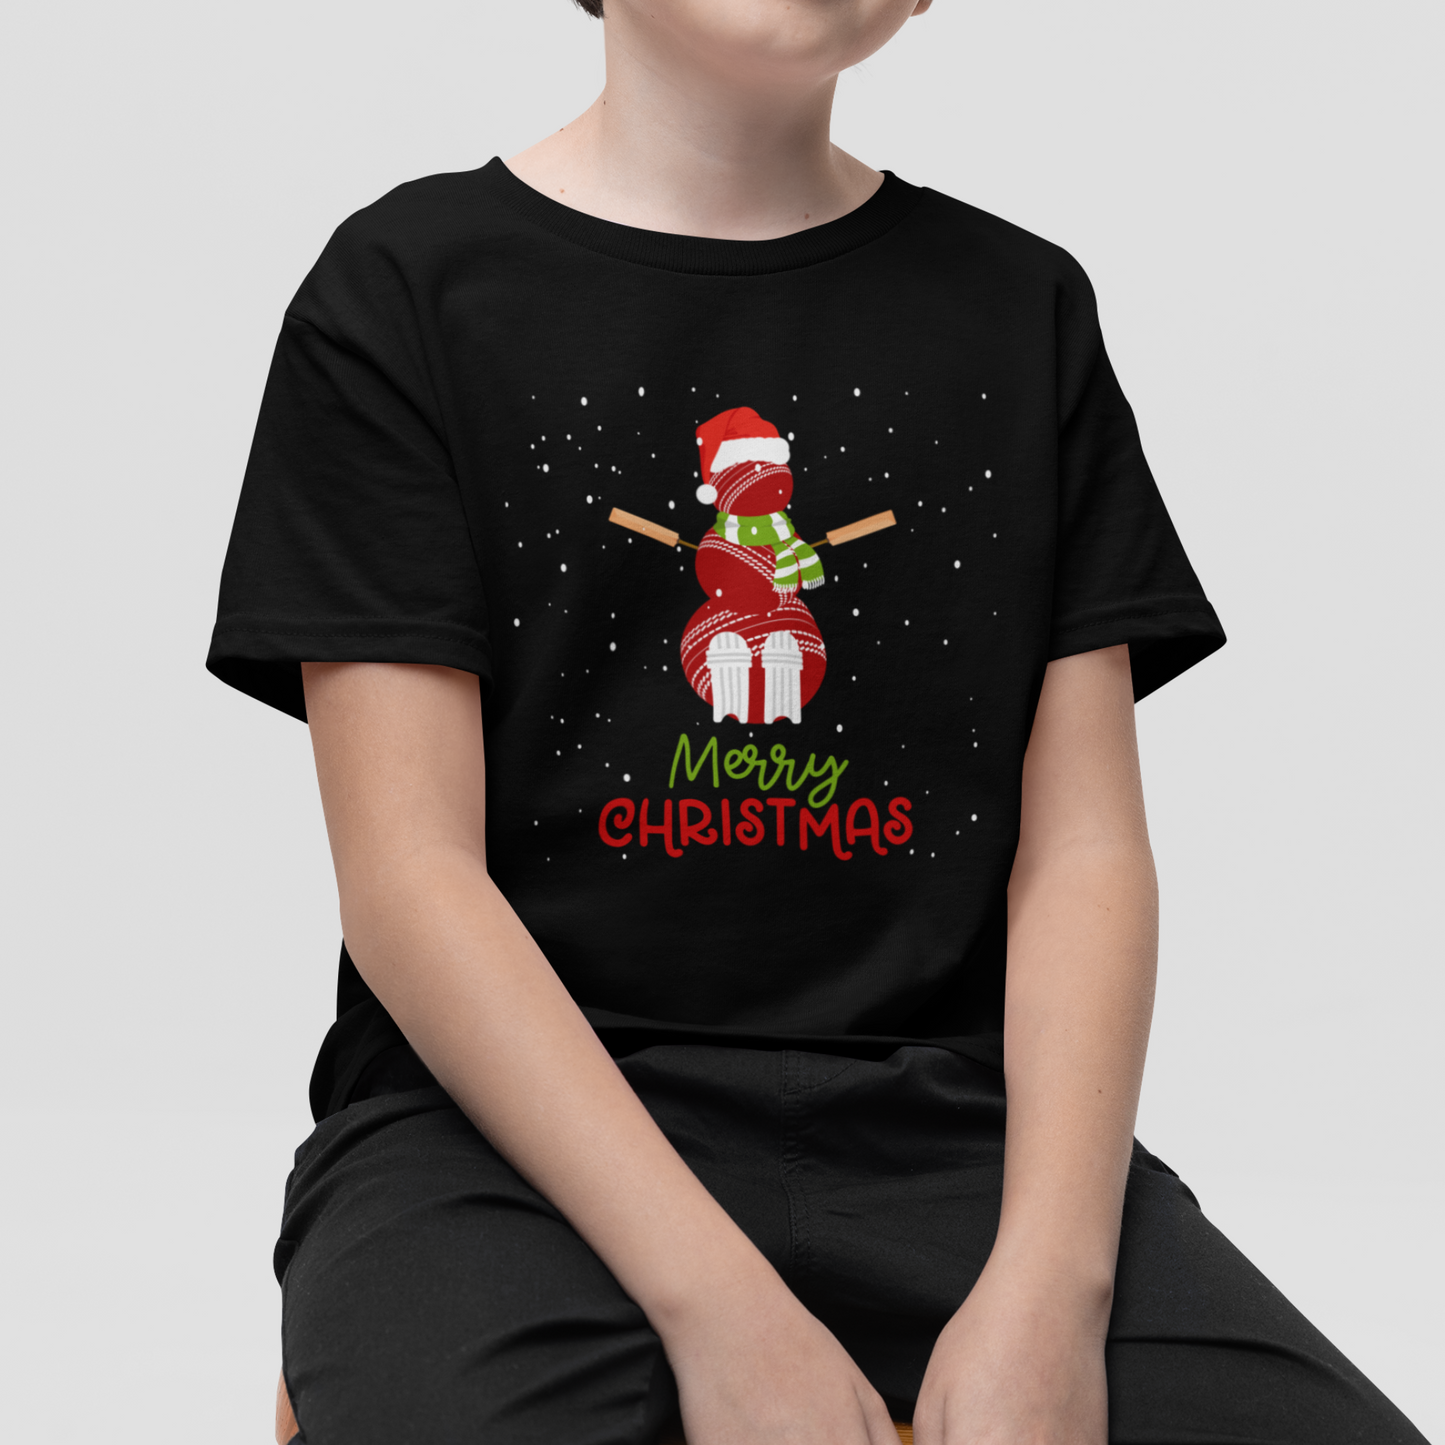 A boy wears a black short-sleeve t-shirt with a cricket ball snowman wearing a Santa hat with falling snow.